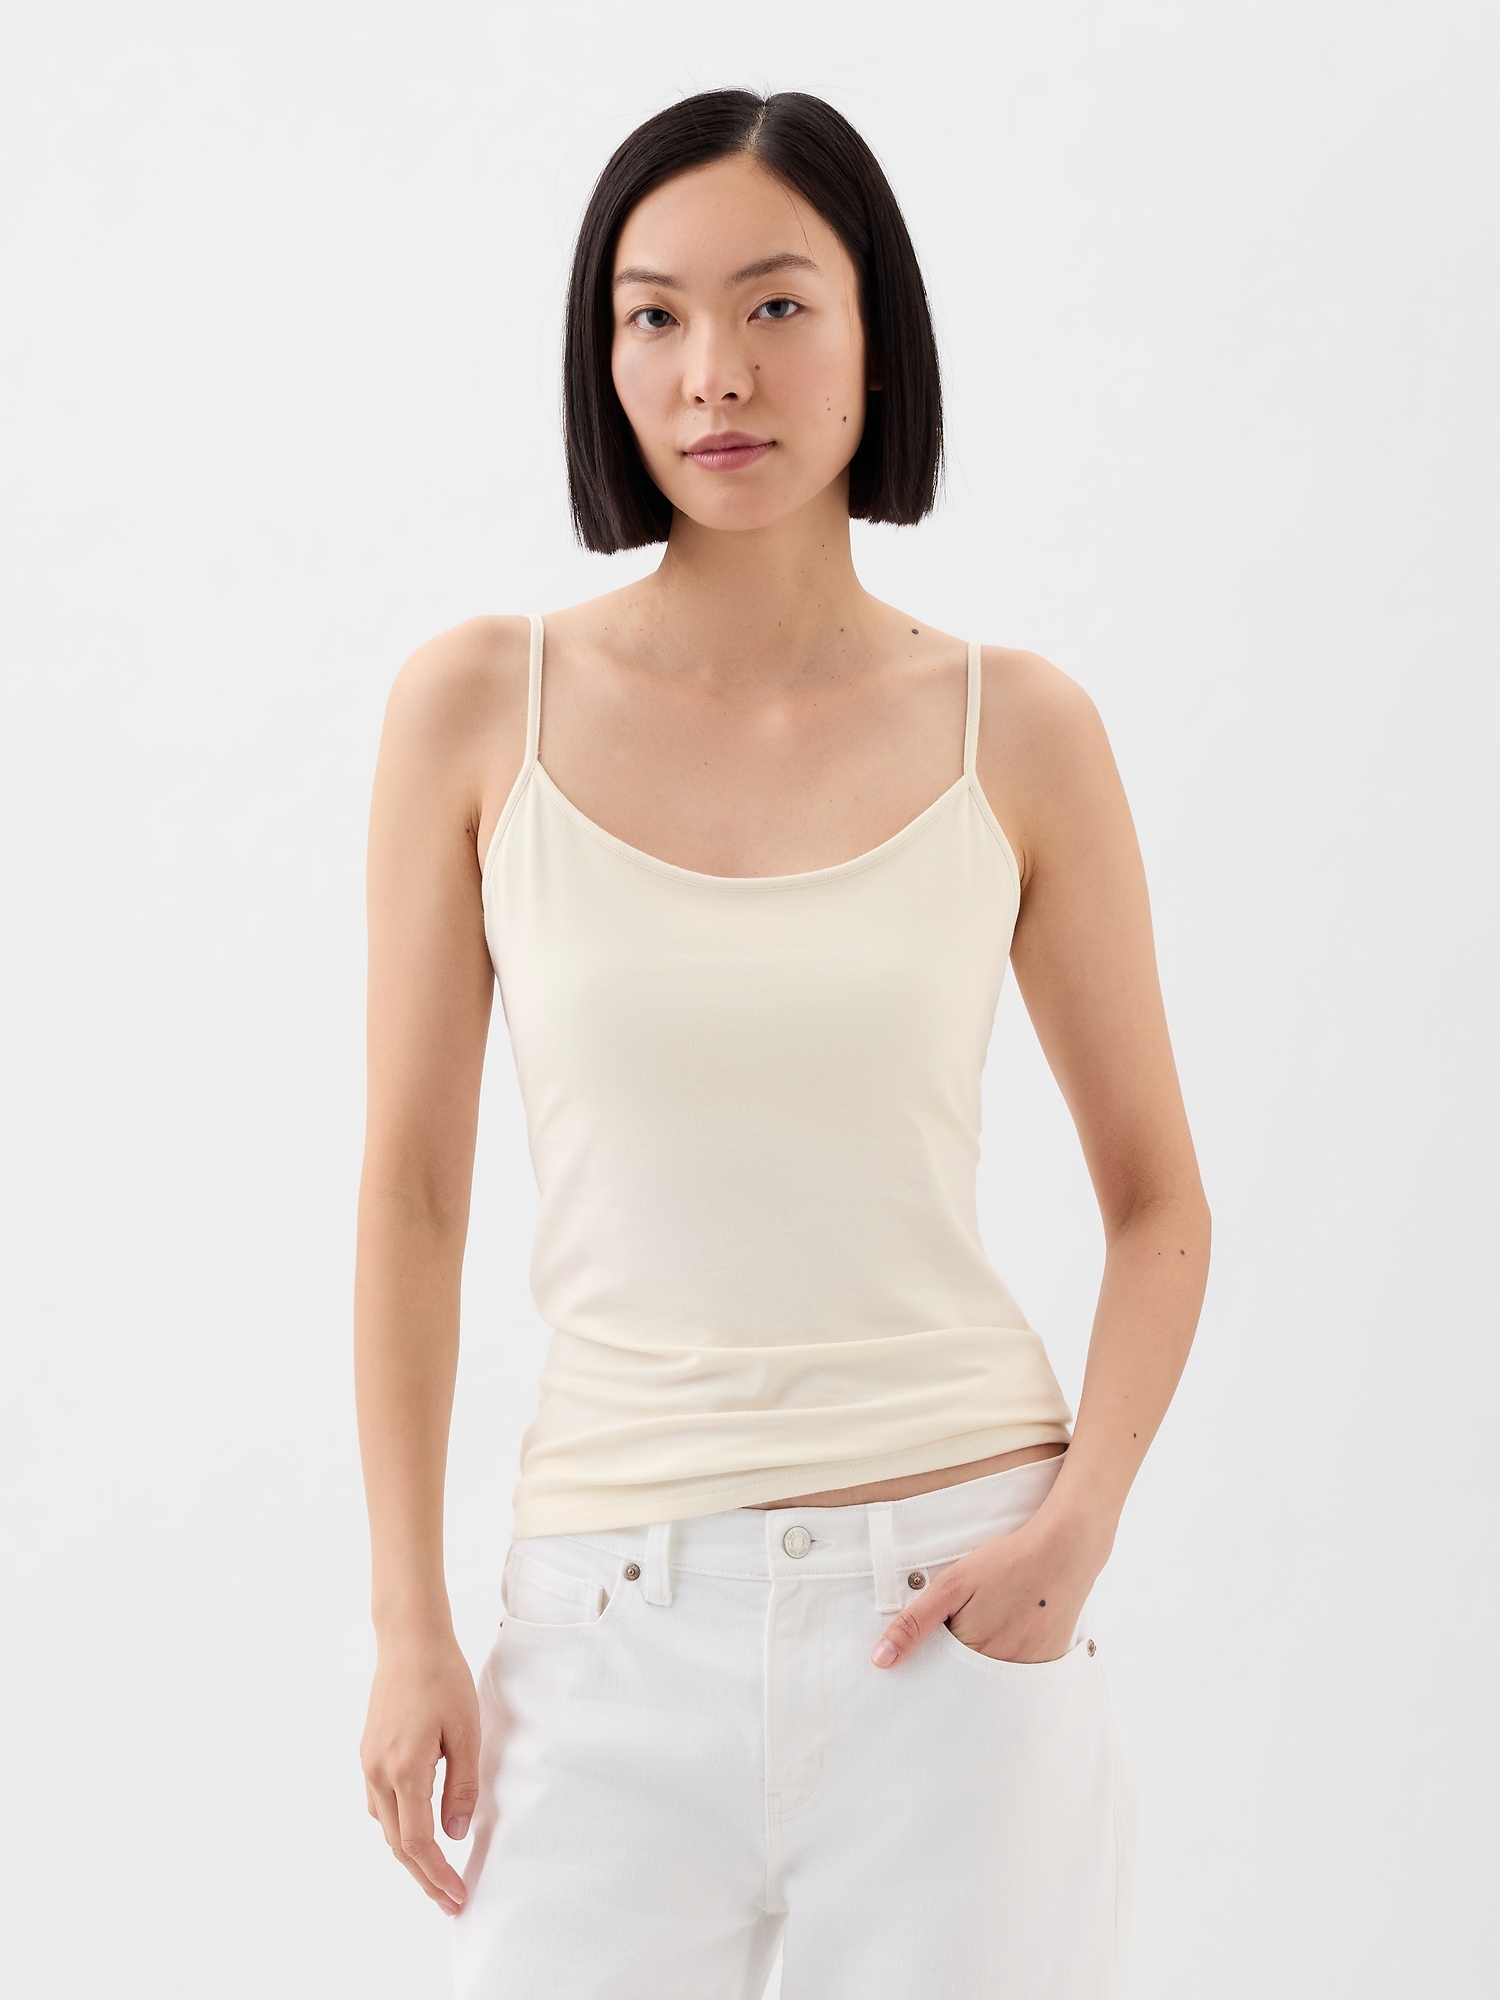 Long Cotton Camisole Tank Top with Built in Bra for Women Basic Cami with  Shelf Bra Tank Tops Undershirt